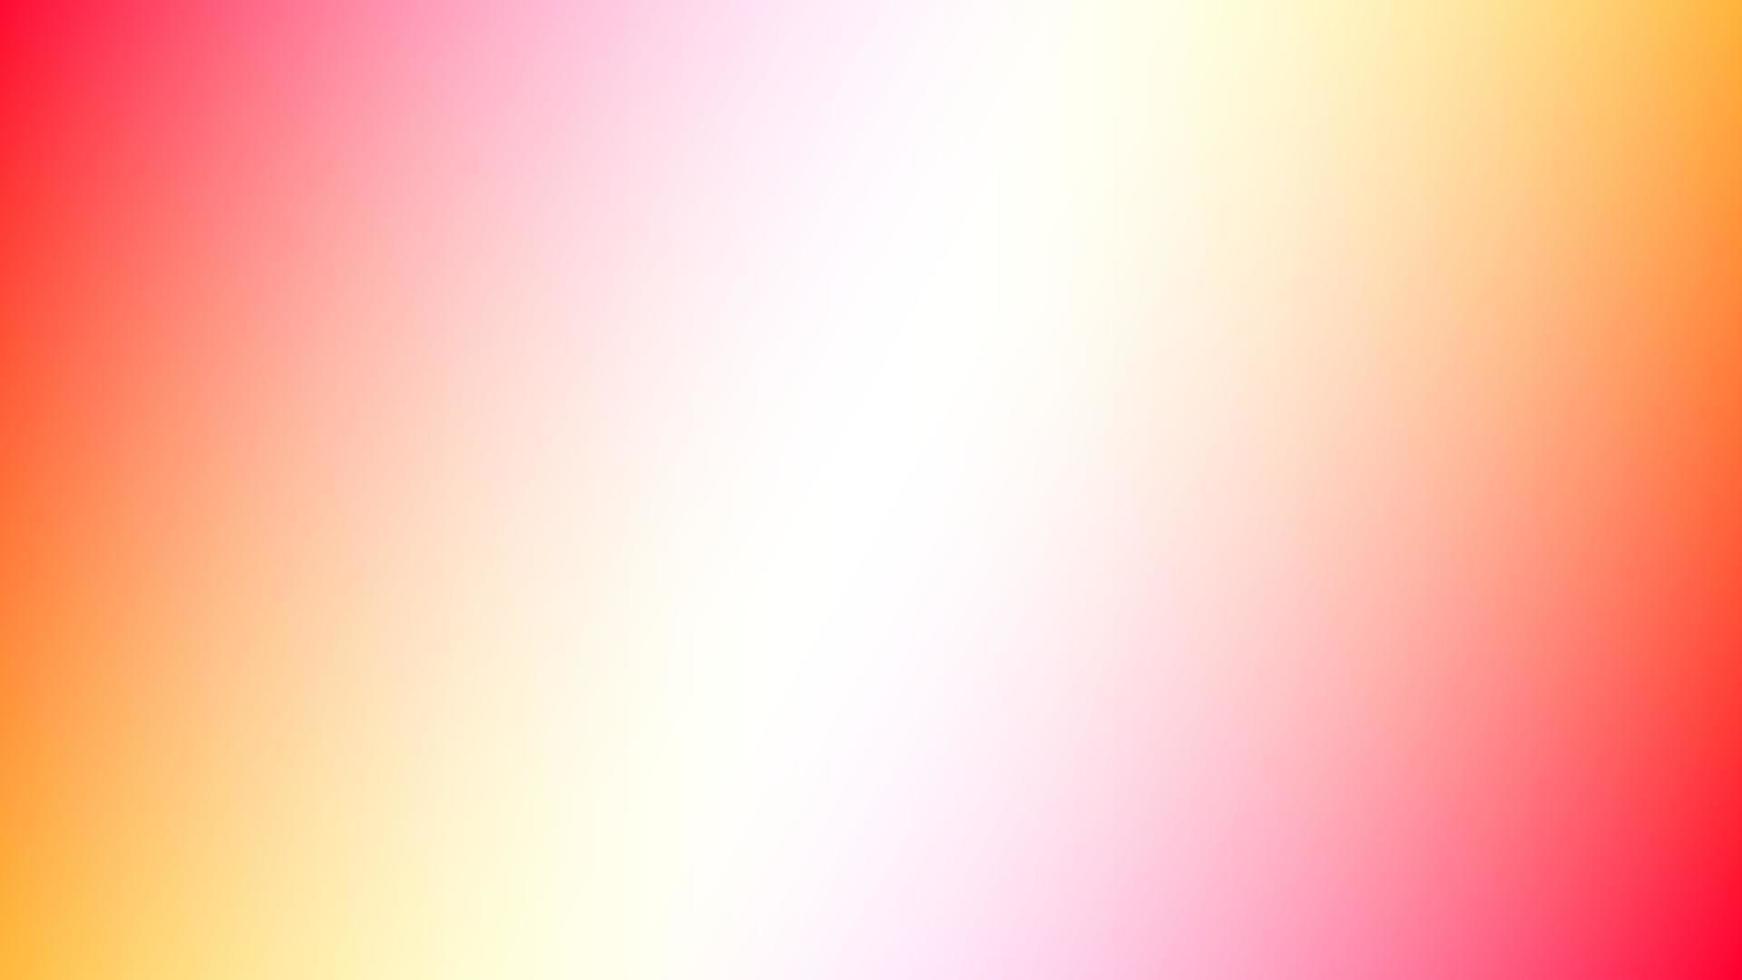 orange, red and white blurred abstract background. minimal, simple and color concept. used for background, wallpaper, banner or web vector